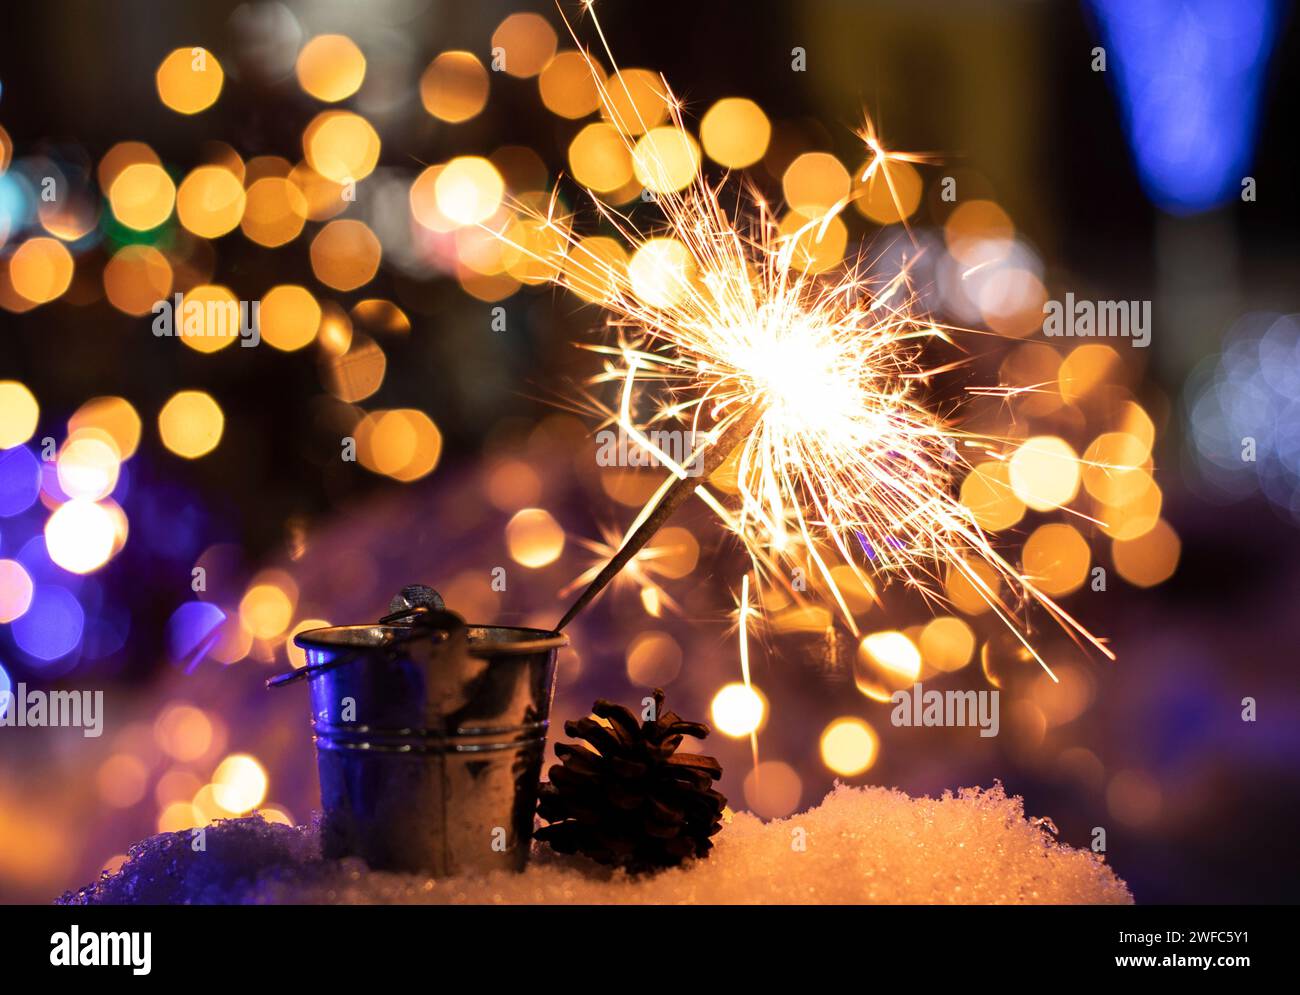 Flames of Bengal fire on the streets of the night city Stock Photo